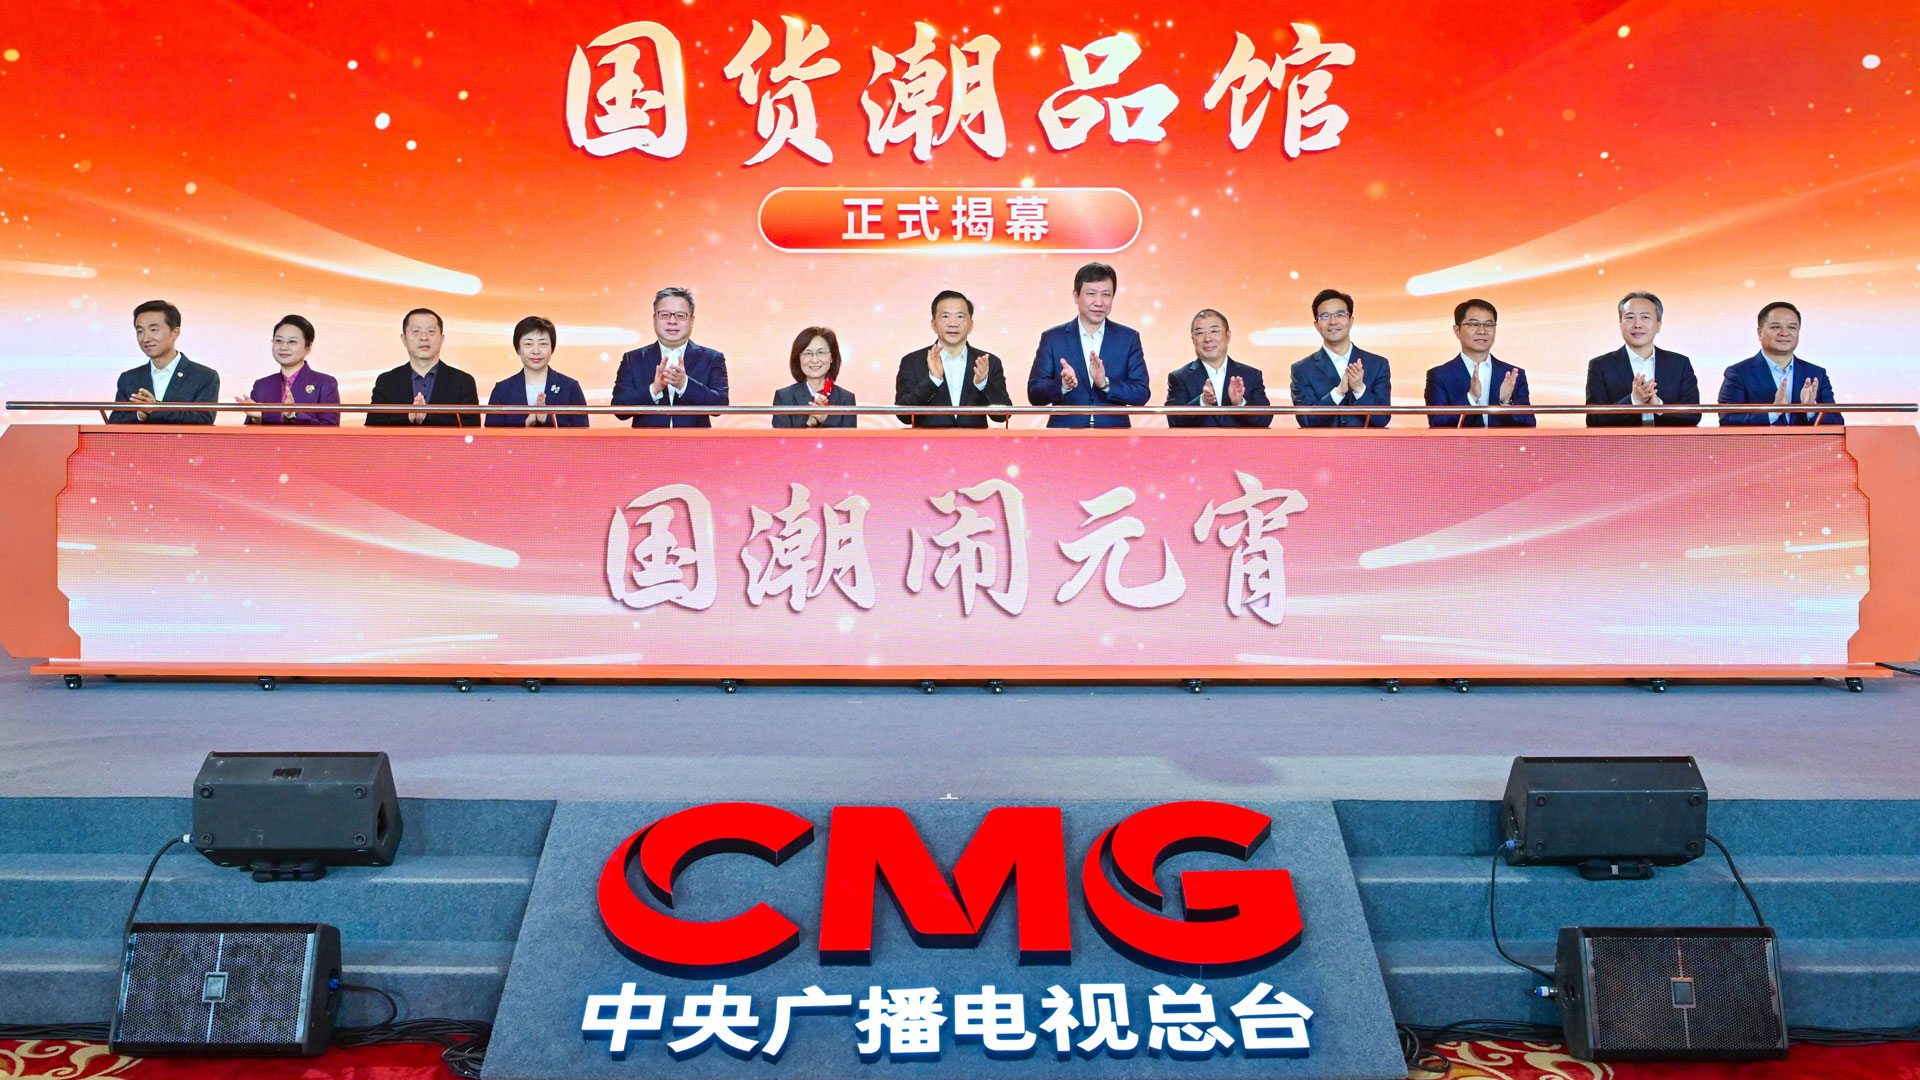 China Media Group (CMG) unveils a new online platform for the promotion of made-in-China brands with other guests, Beijing, China, February 24, 2024. /CMG